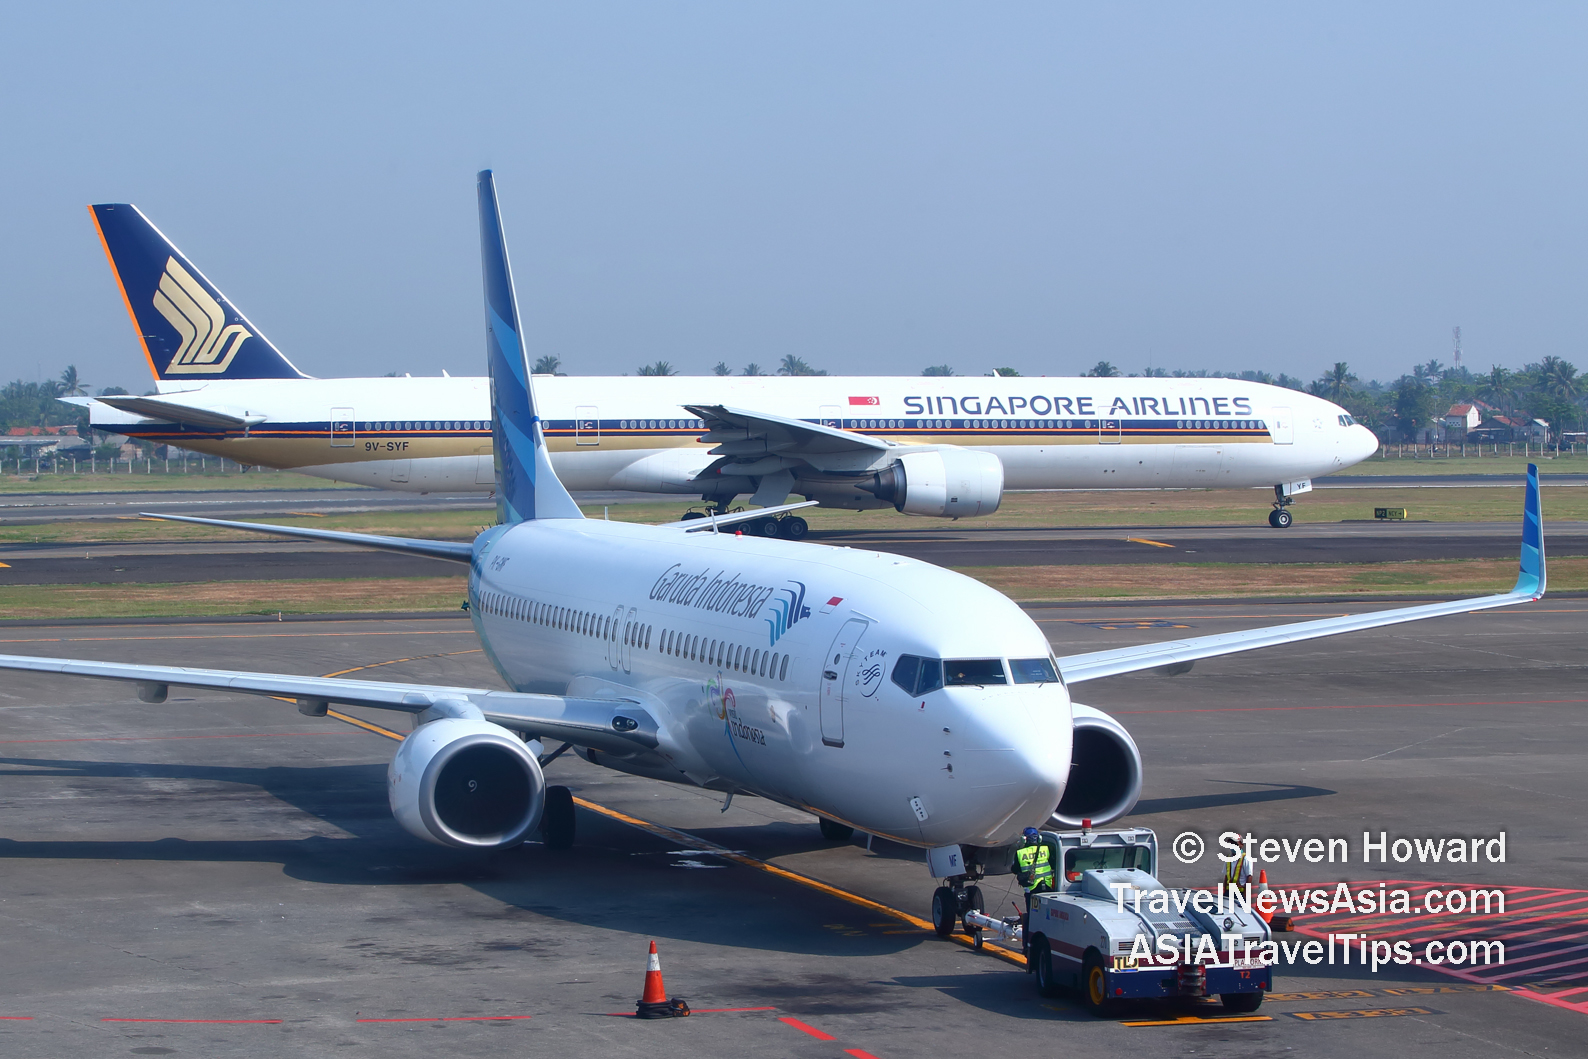 Garuda Boeing 737 MAX 8 reg: PK-GMF in the foreground with Singapore Airlines Boeing 777 reg: 9V-SYF in the background. Picture by Steven Howard of TravelNewsAsia.com Click to enlarge.